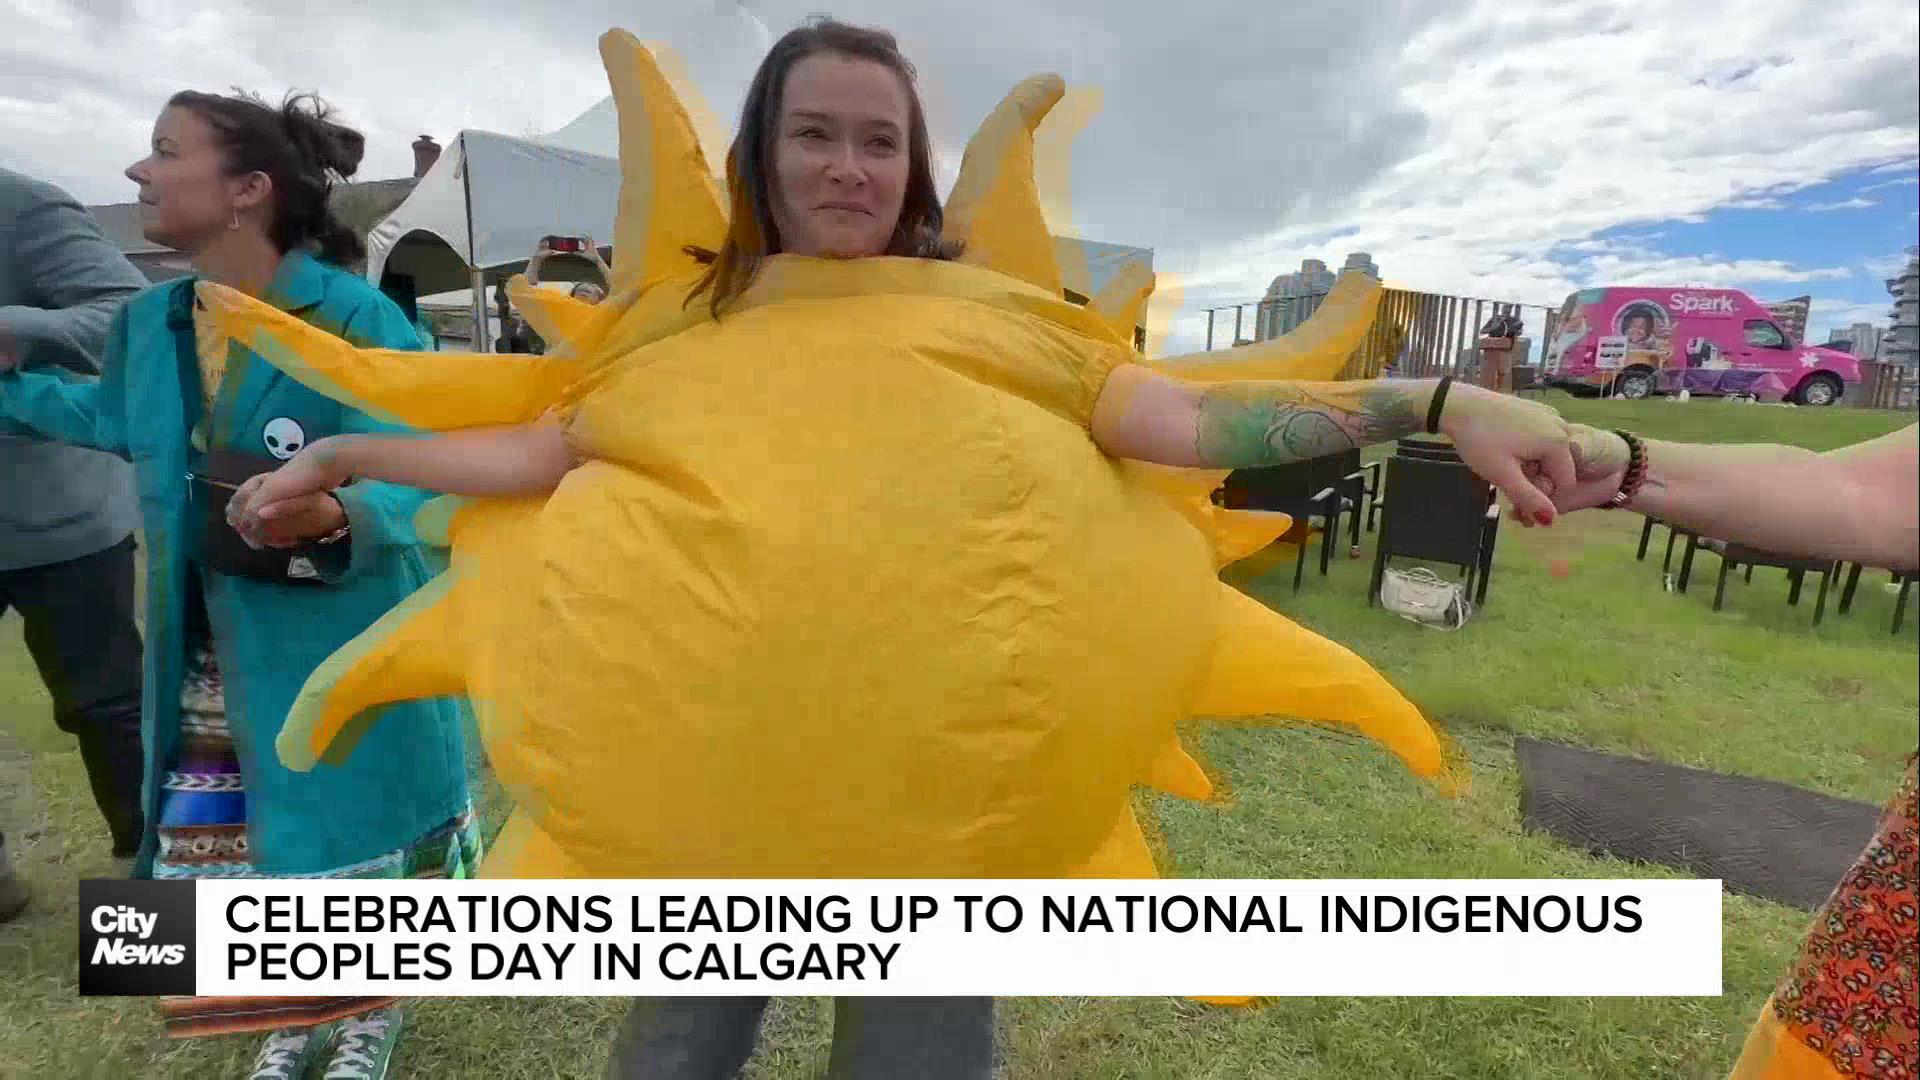 Celebrations leading up to National Indigenous Peoples Day in Calgary